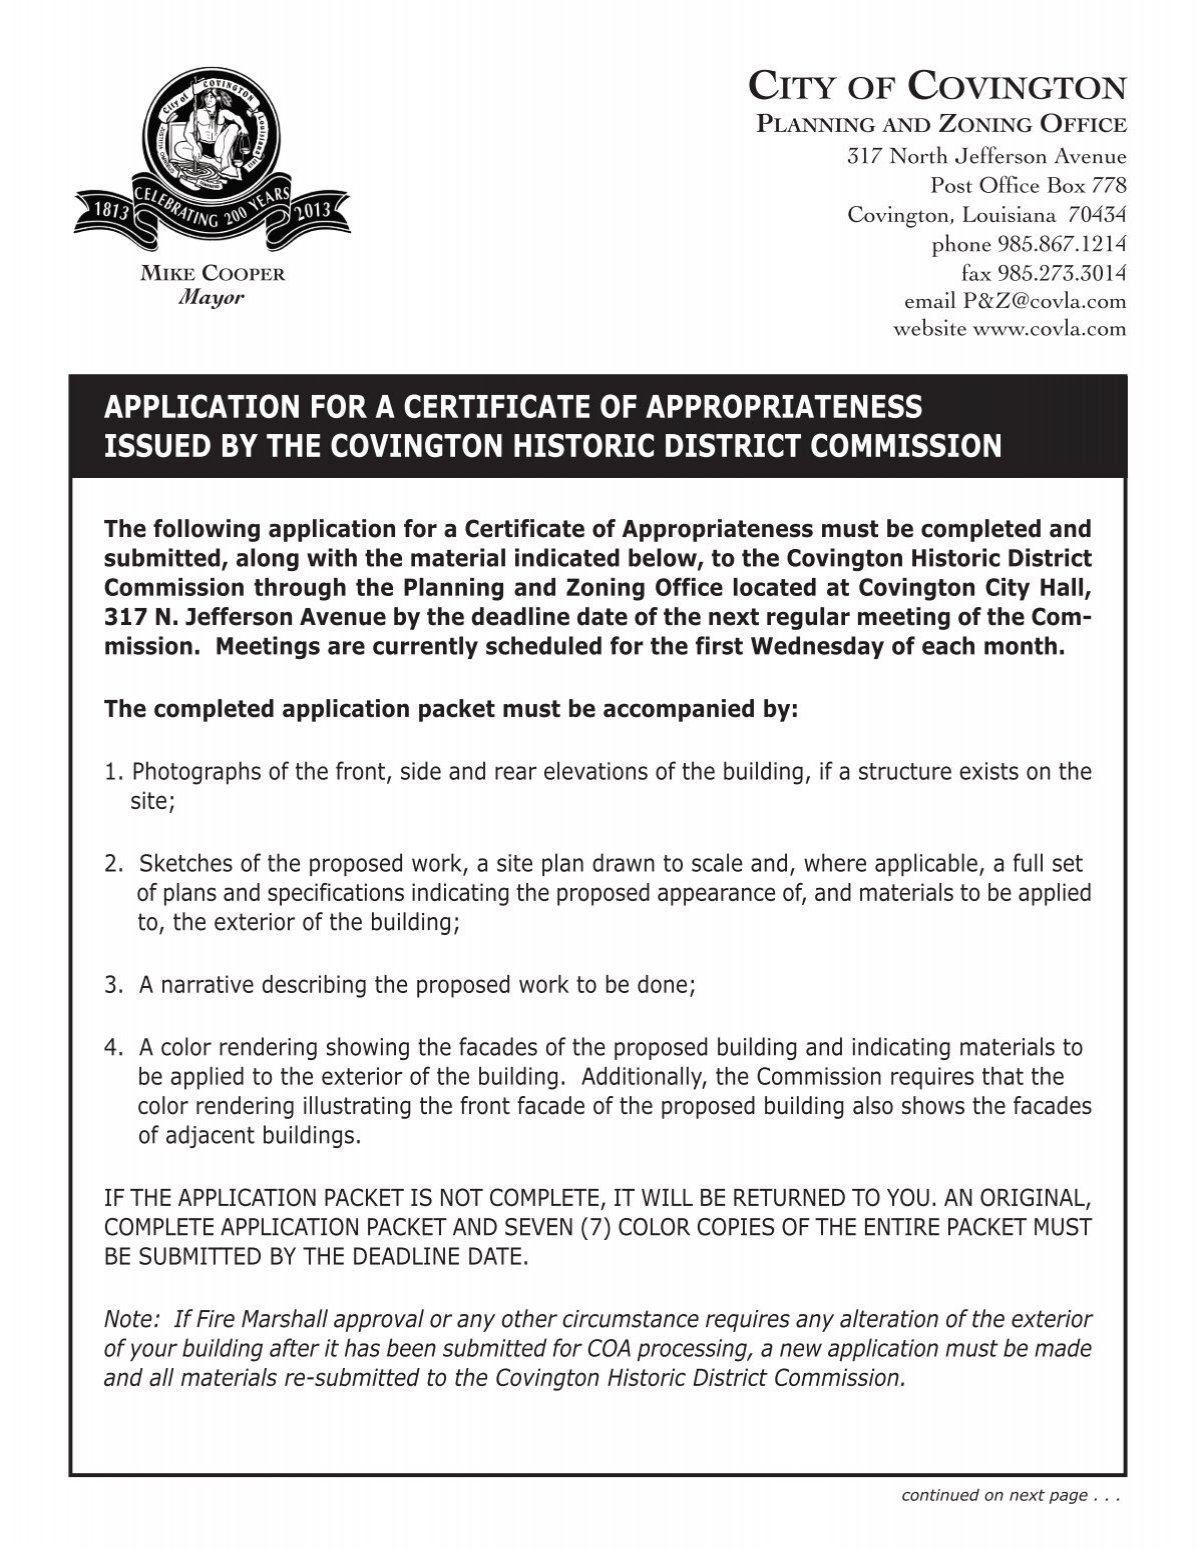 Application for a Certificate of Appropriateness issued by the